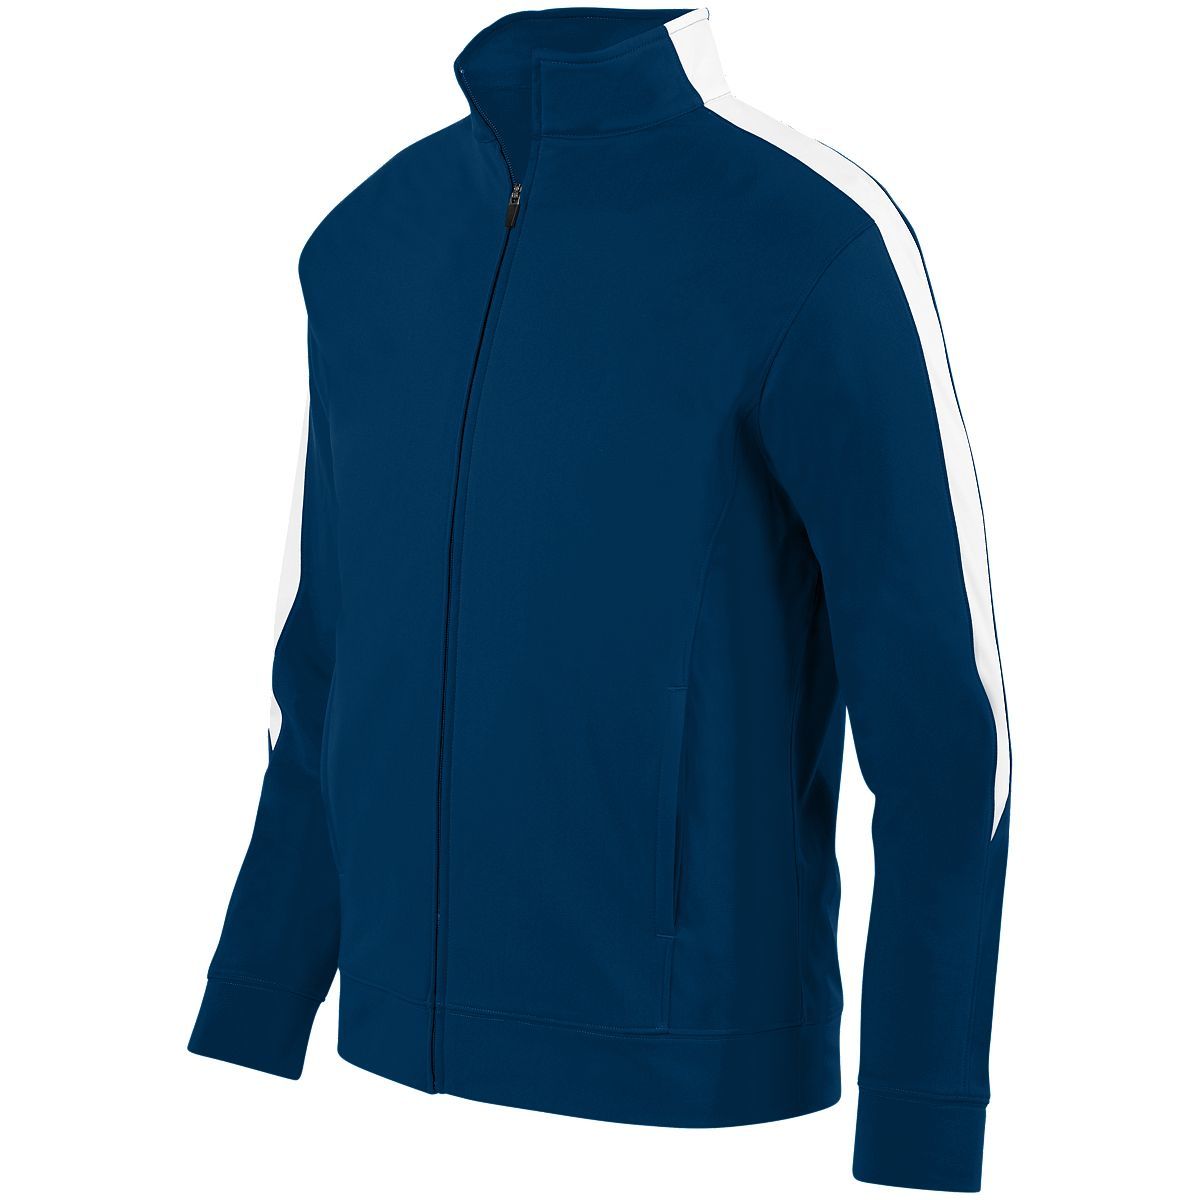 Augusta Sportswear Medalist Jacket 2.0 in Navy/White  -Part of the Adult, Adult-Jacket, Augusta-Products, Outerwear product lines at KanaleyCreations.com